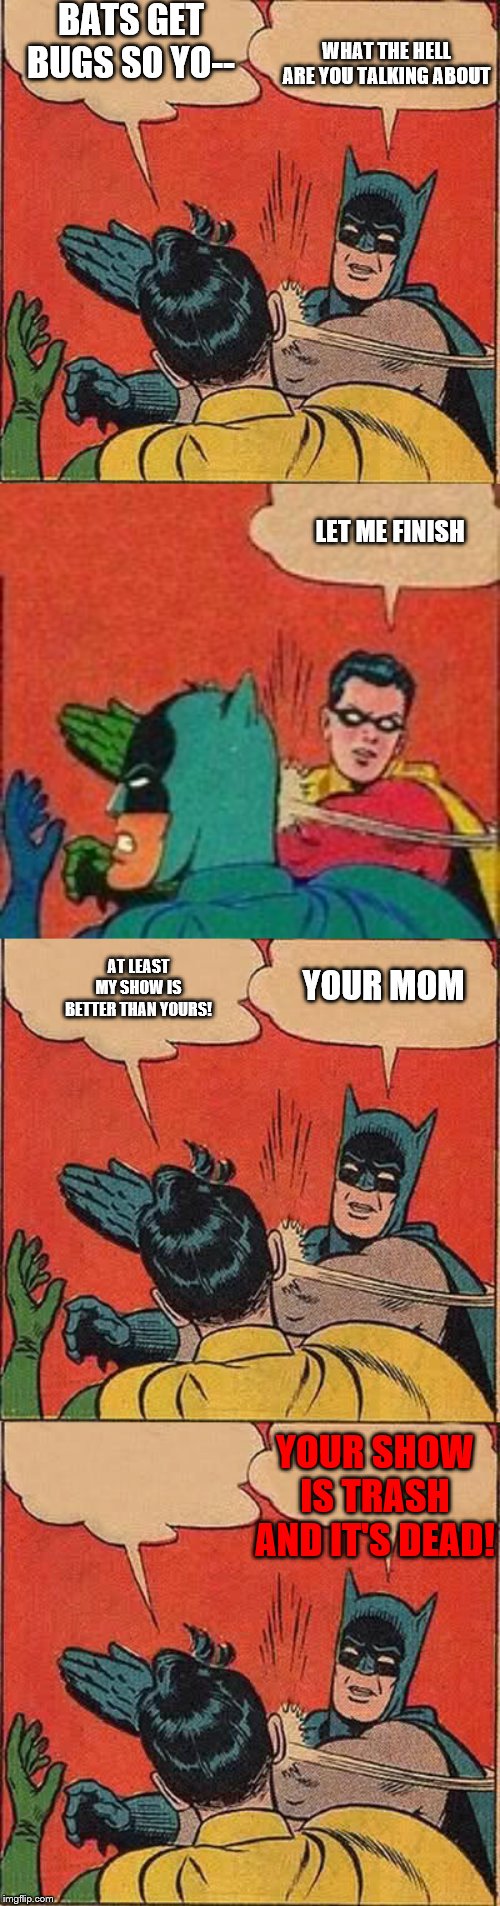 Batman is suppose to eat bugs | BATS GET BUGS SO YO--; WHAT THE HELL ARE YOU TALKING ABOUT; LET ME FINISH; YOUR MOM; AT LEAST MY SHOW IS BETTER THAN YOURS! YOUR SHOW IS TRASH AND IT'S DEAD! | image tagged in memes,batman slapping robin,batman and robin,robin slapping batman,fight club,slap | made w/ Imgflip meme maker